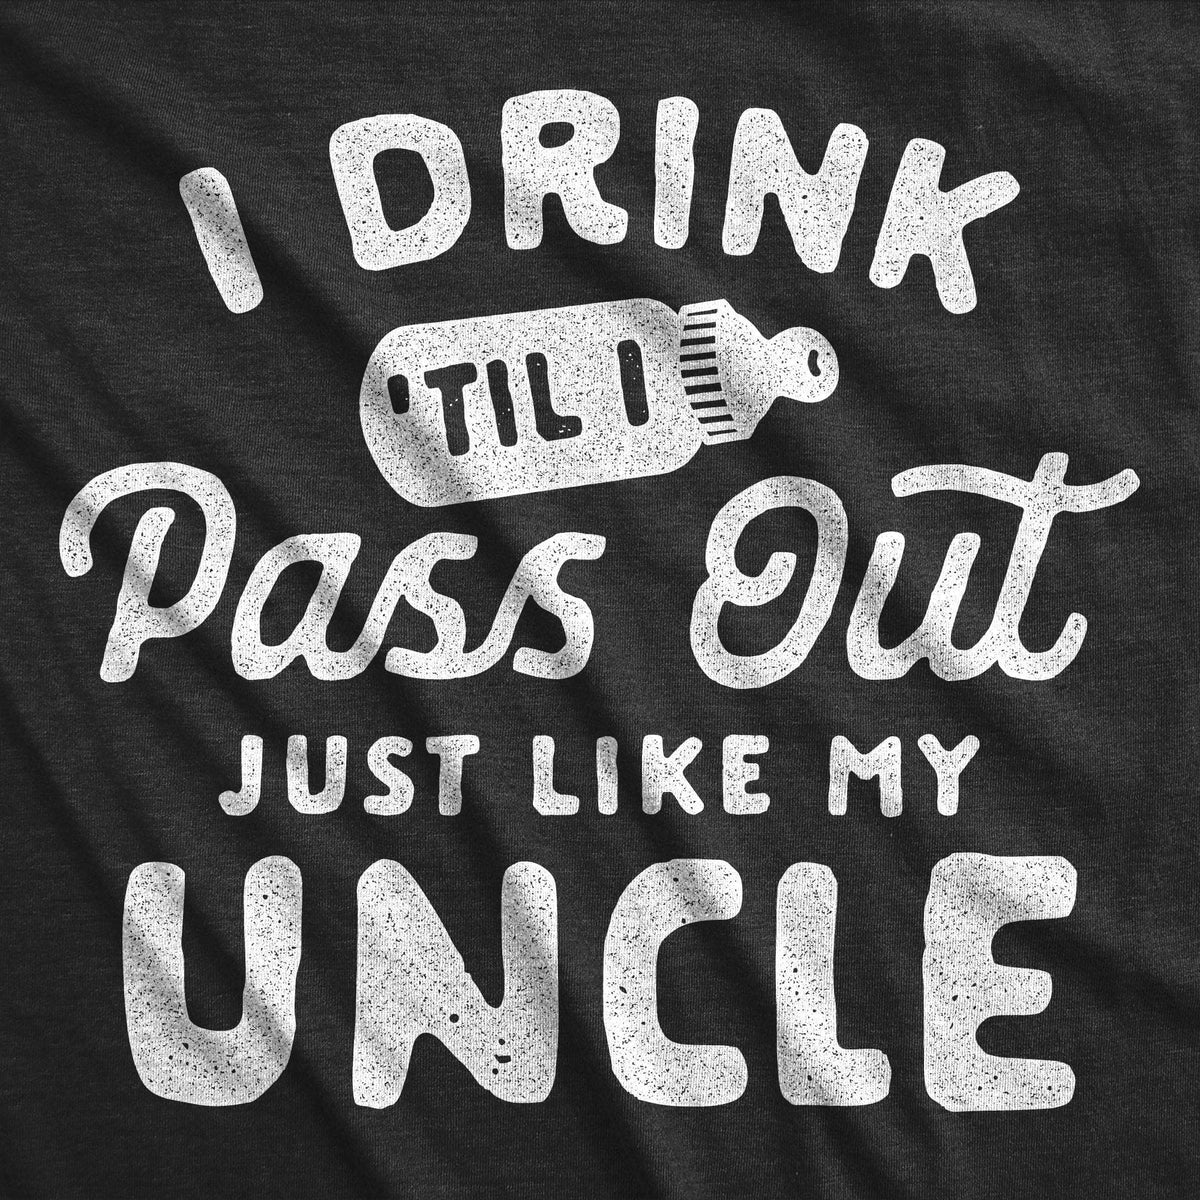 I Drink Til I Pass Out Just Like My Uncle Baby Bodysuit - Crazy Dog T-Shirts